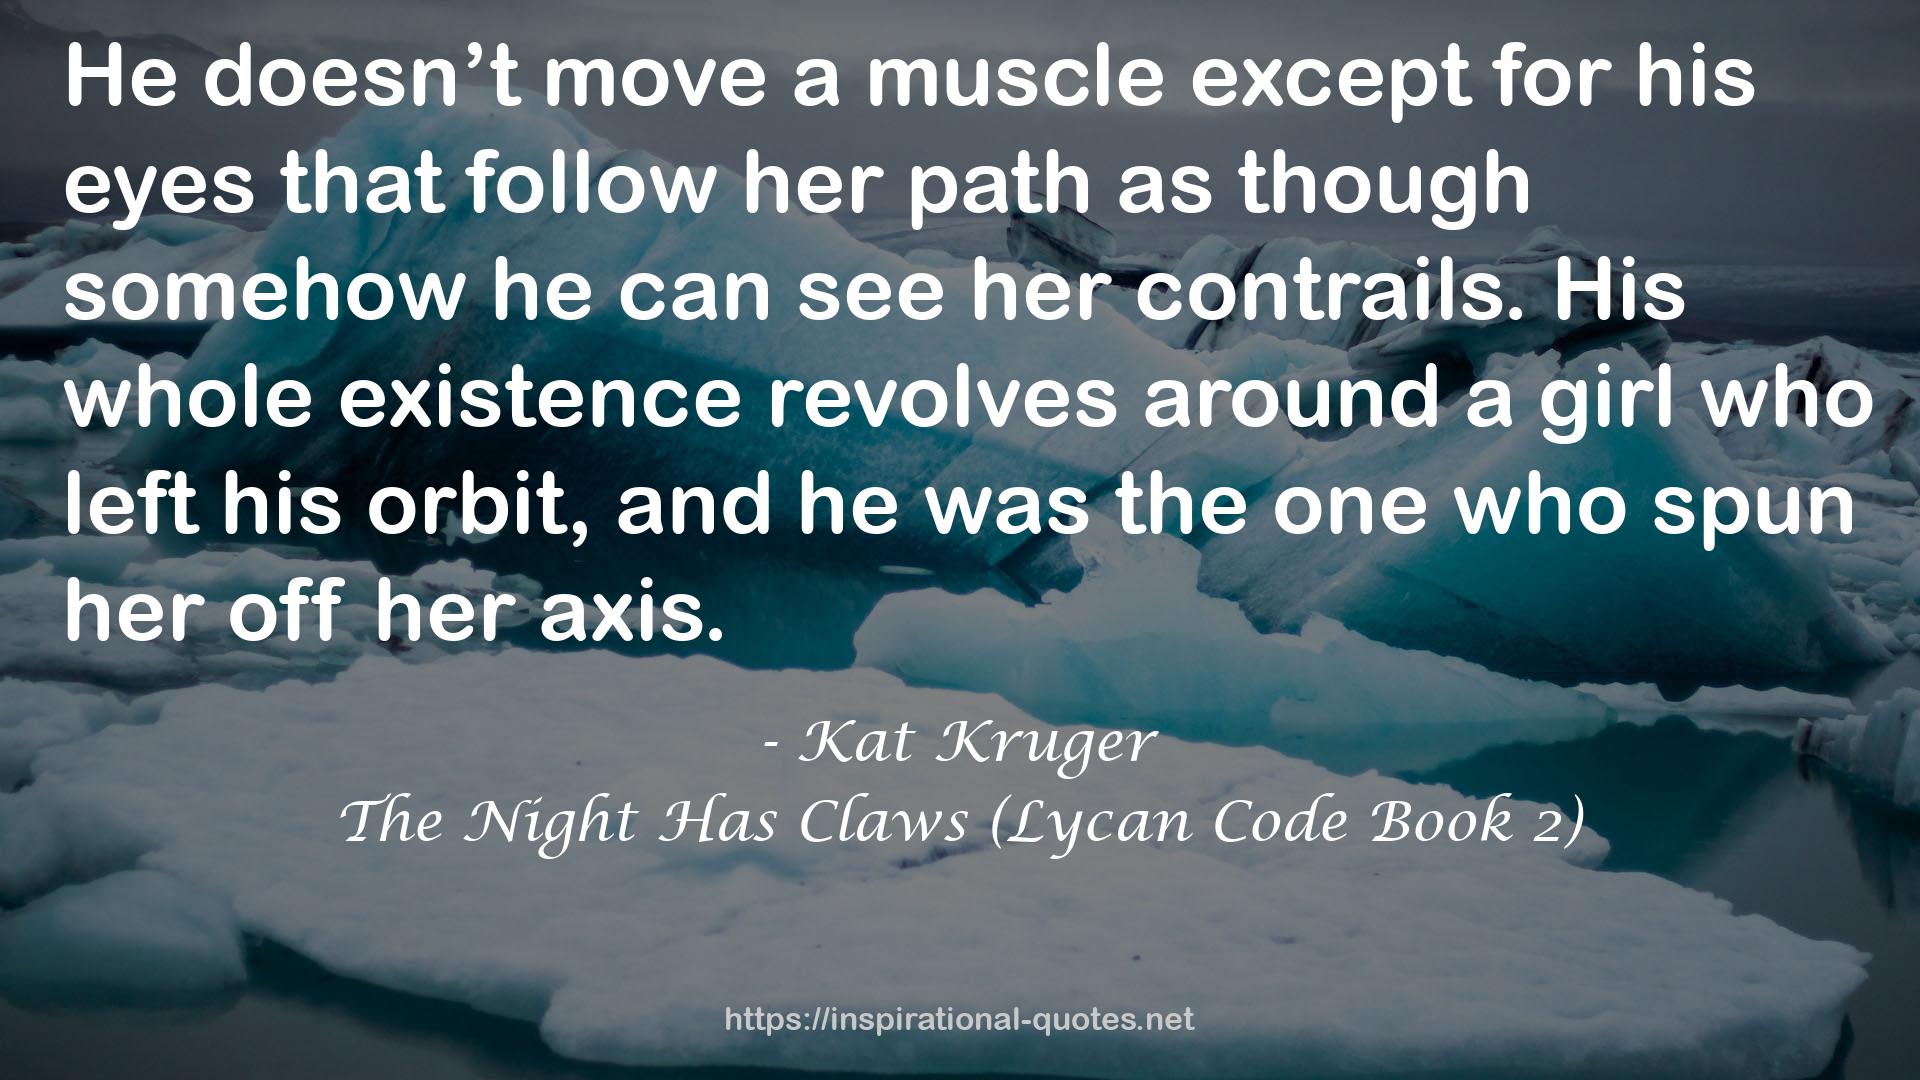 The Night Has Claws (Lycan Code Book 2) QUOTES